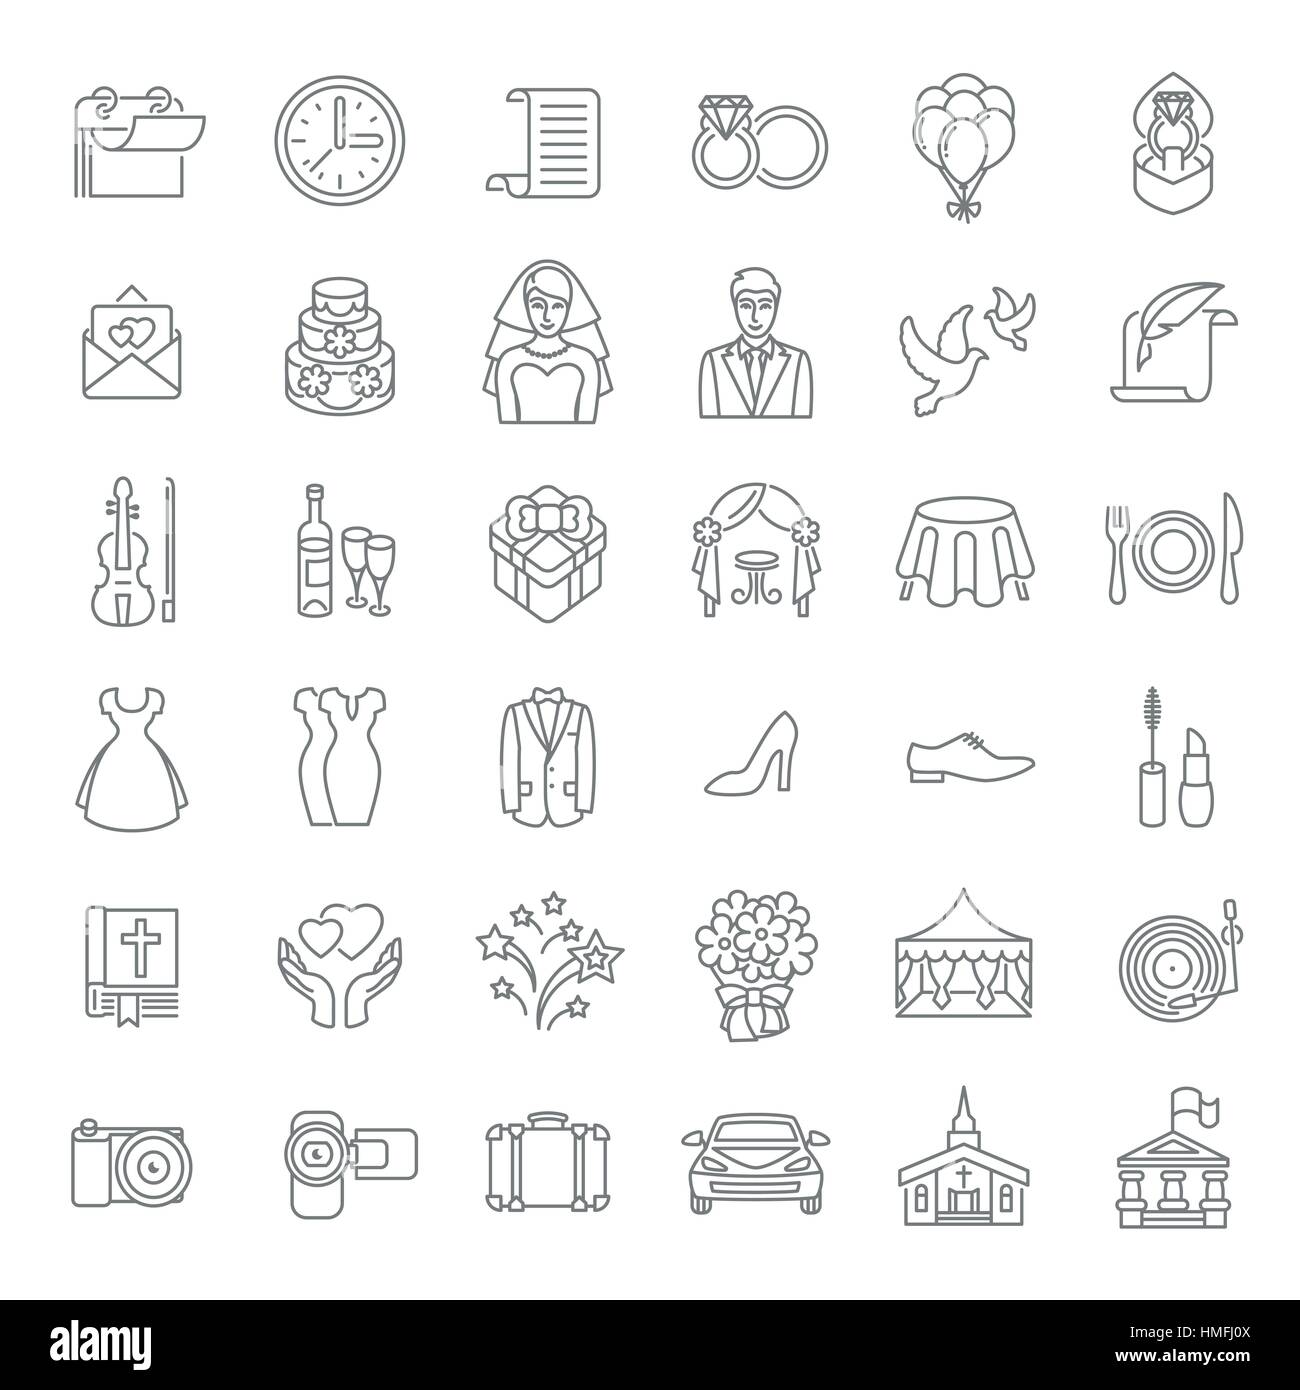 Set of modern flat linear vector wedding icons. Line art conceptual symbols of wedding party for web site, mobile or computer apps, infographic, prese Stock Vector